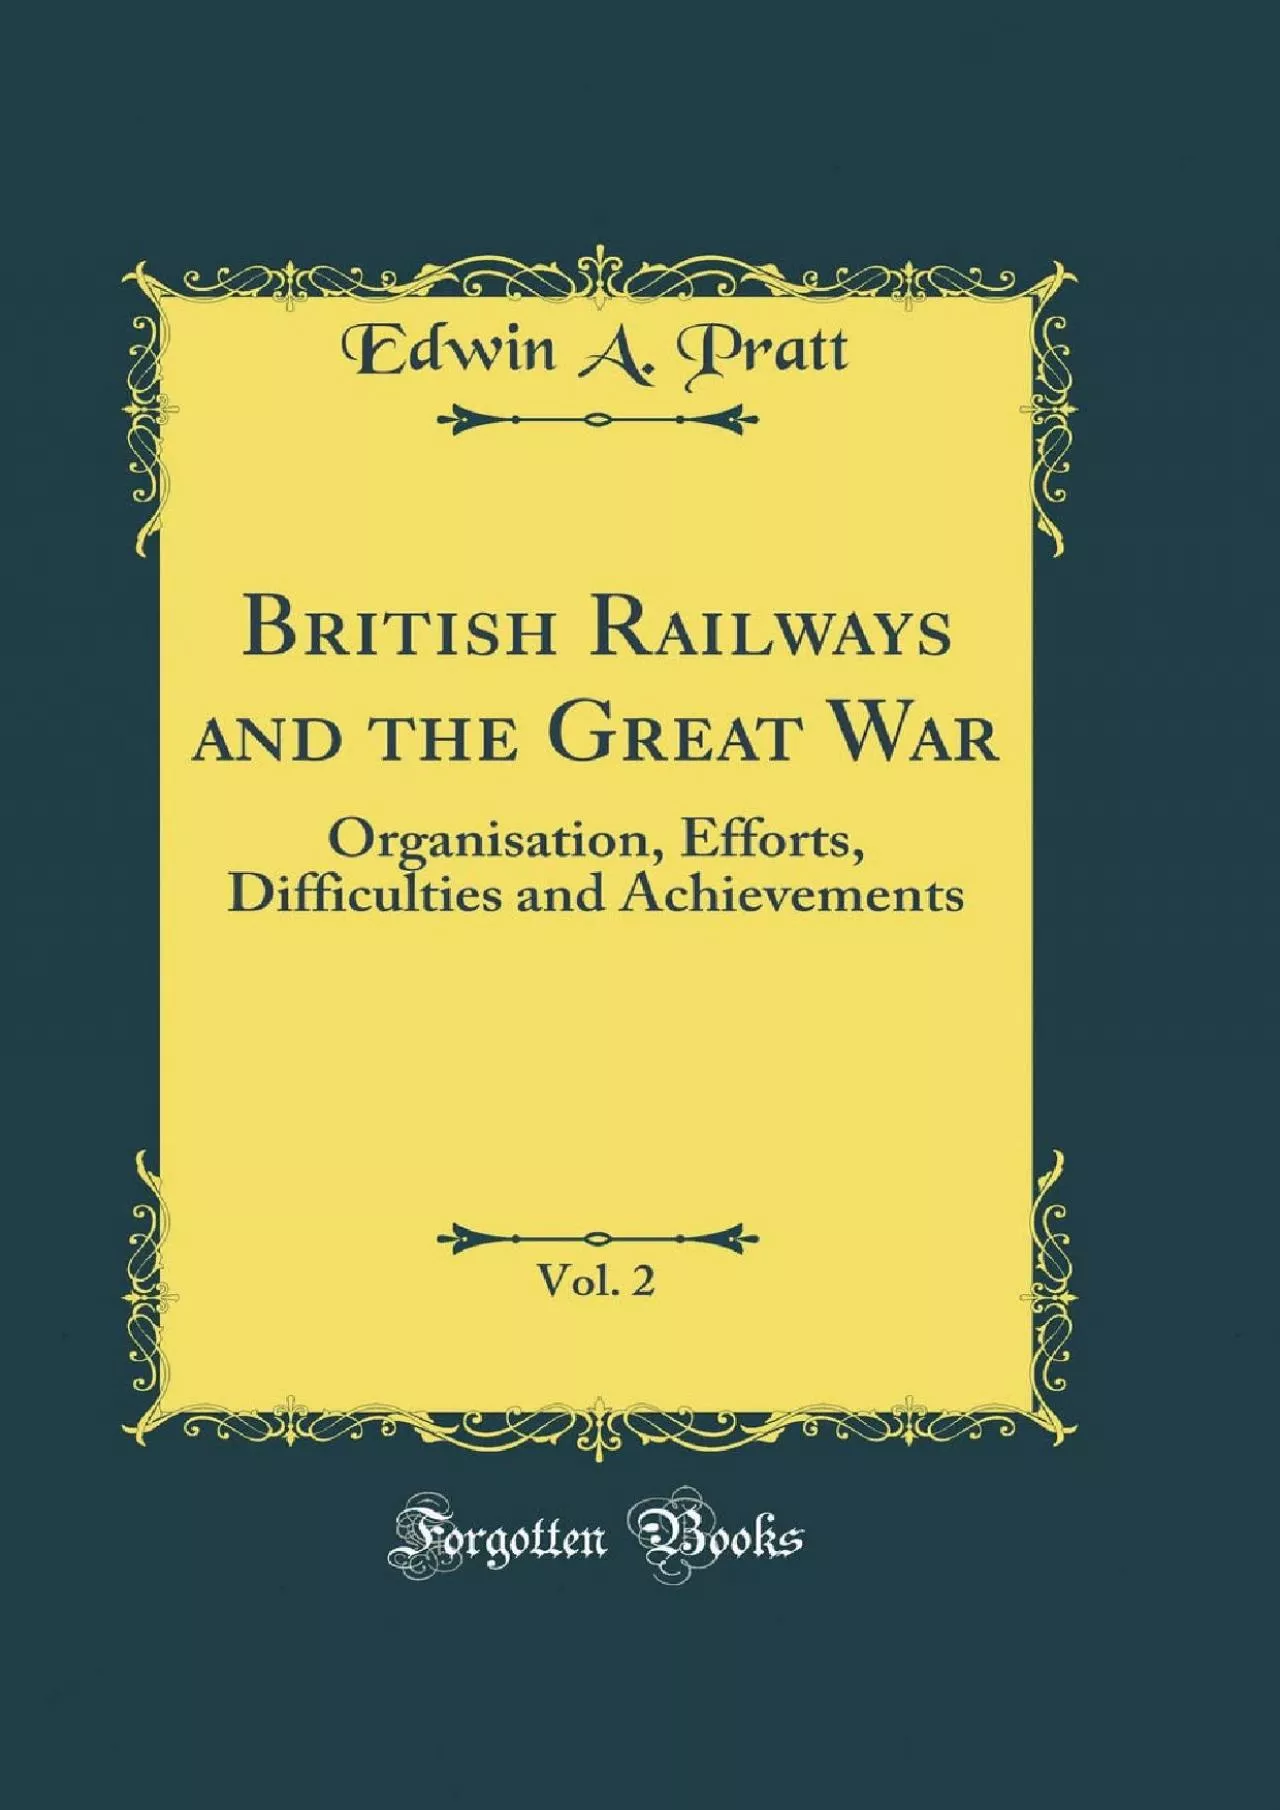 (DOWNLOAD)-British Railways and the Great War, Vol. 2: Organisation, Efforts, Difficulties